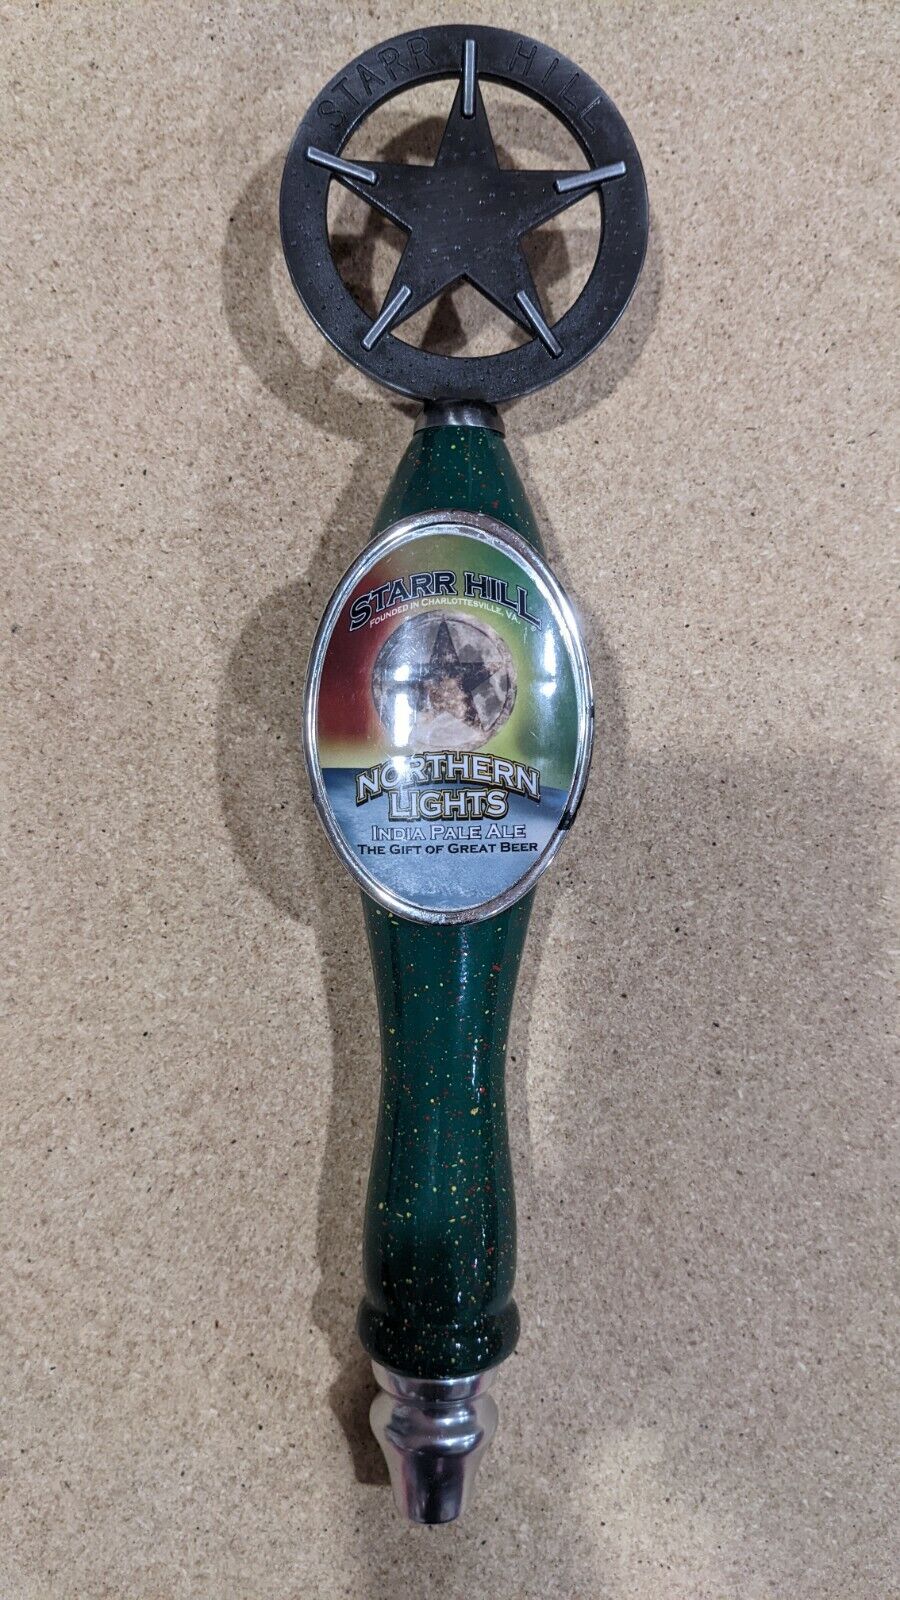 Starr Hill Brewing Northern Lights Ipa Tap Handle